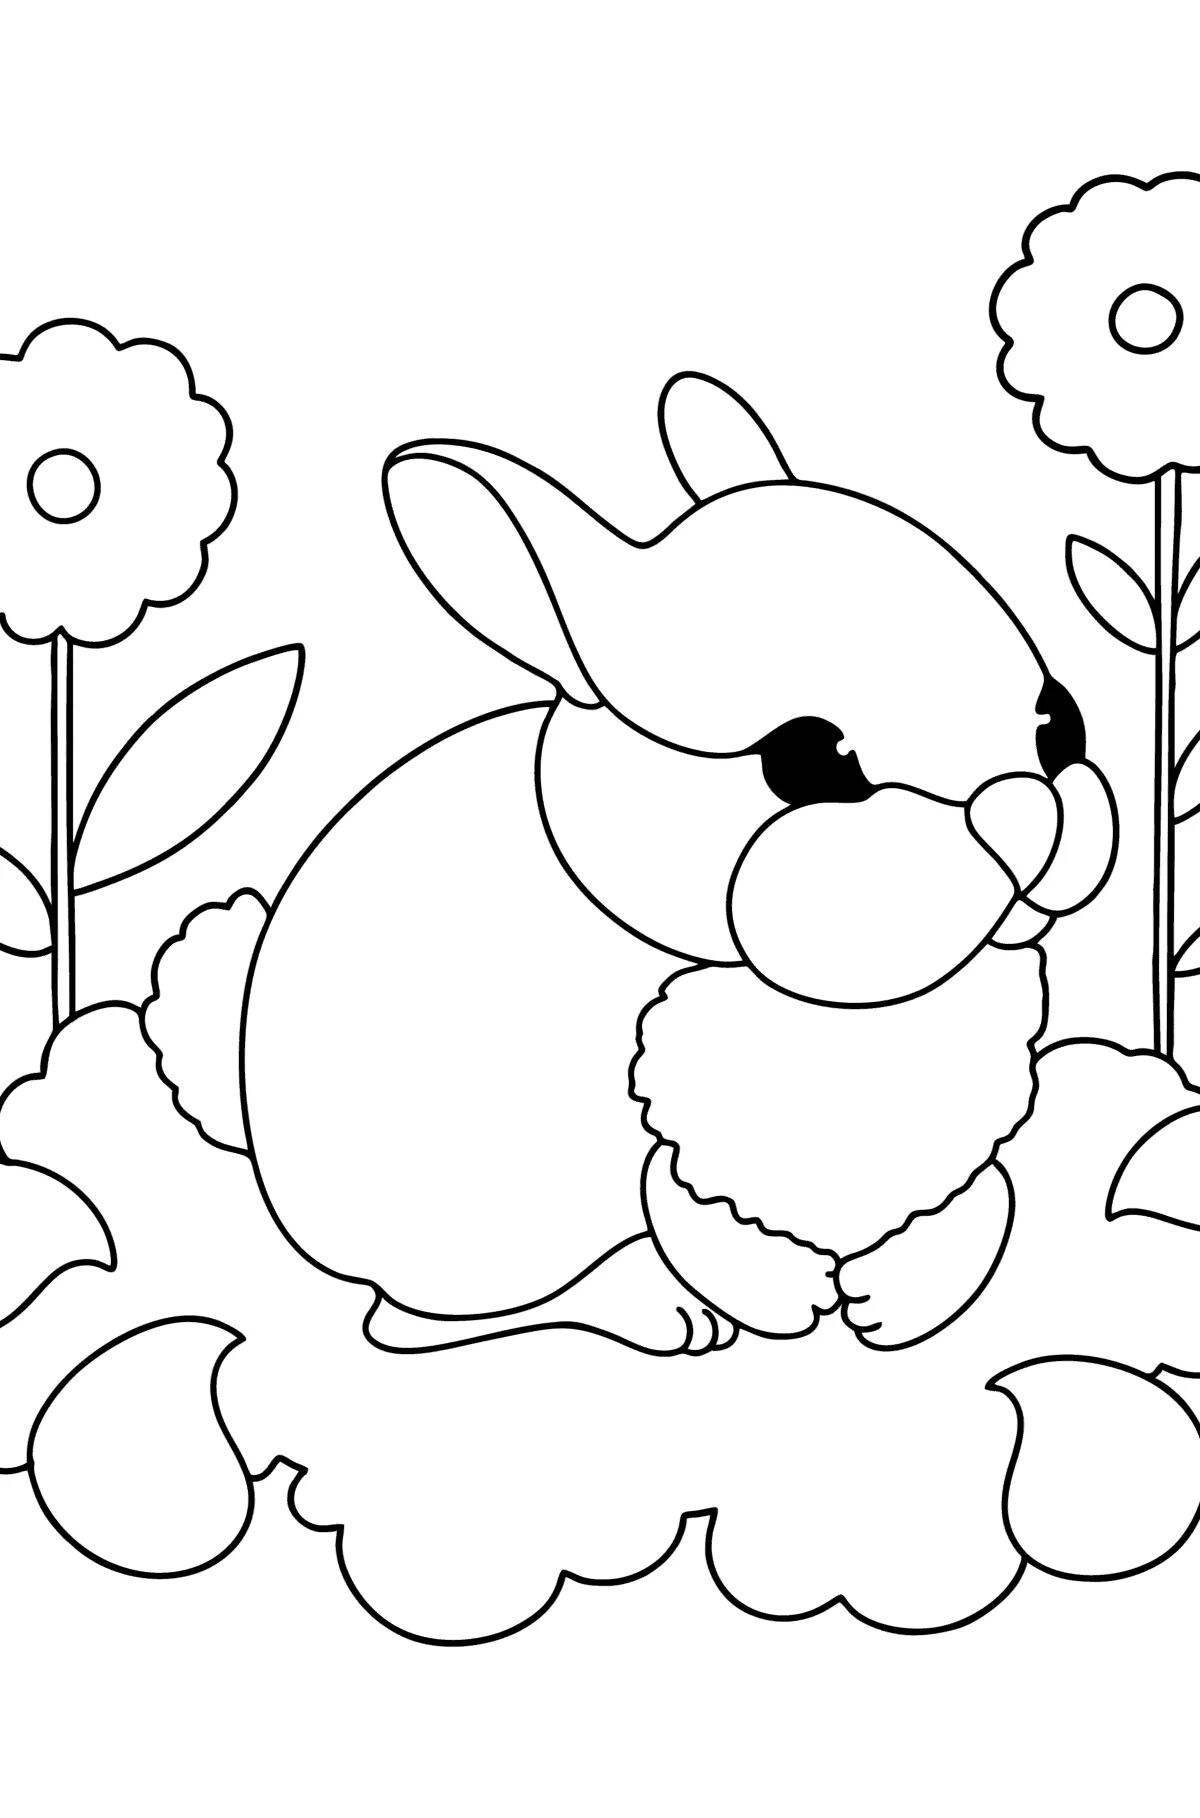 Fun coloring rabbit for children 2-3 years old